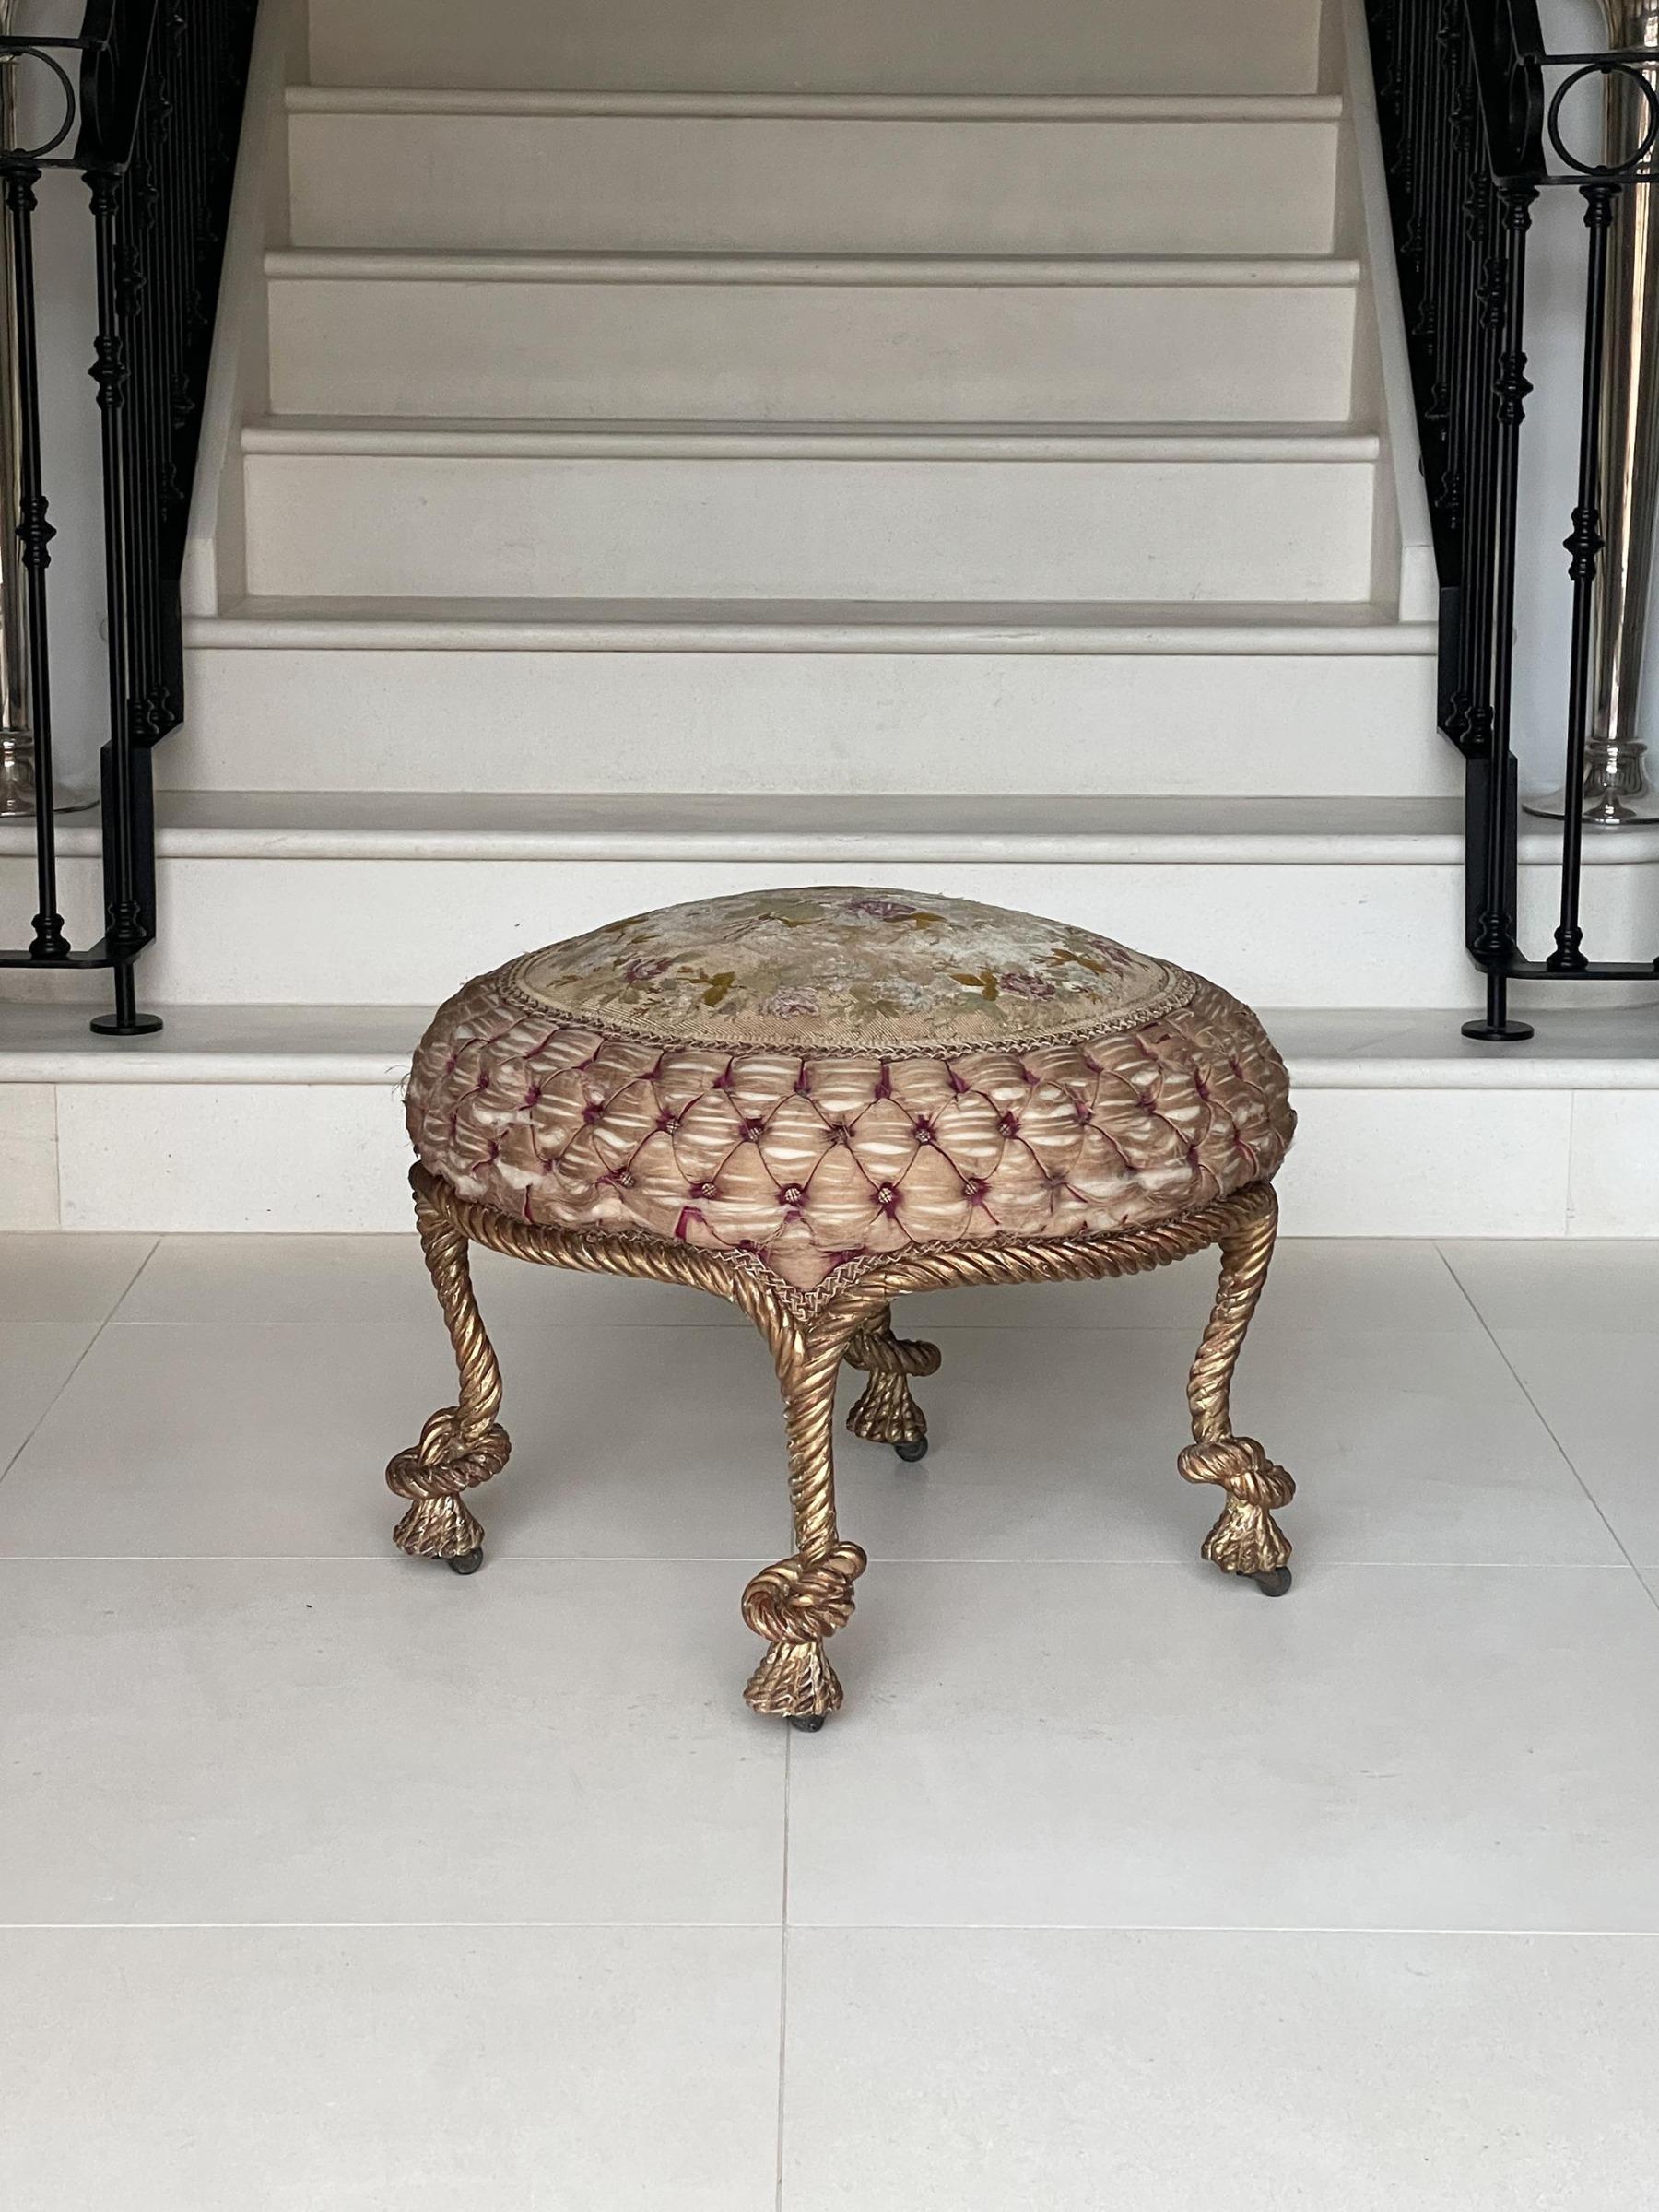 This wonderful French Napoleon III knotted rope twist stool / tabouret retaining its original needlepoint foliate upholstery, is very possibly from the workshop of A.M.E Fournier and previous part of the important collection of Lord